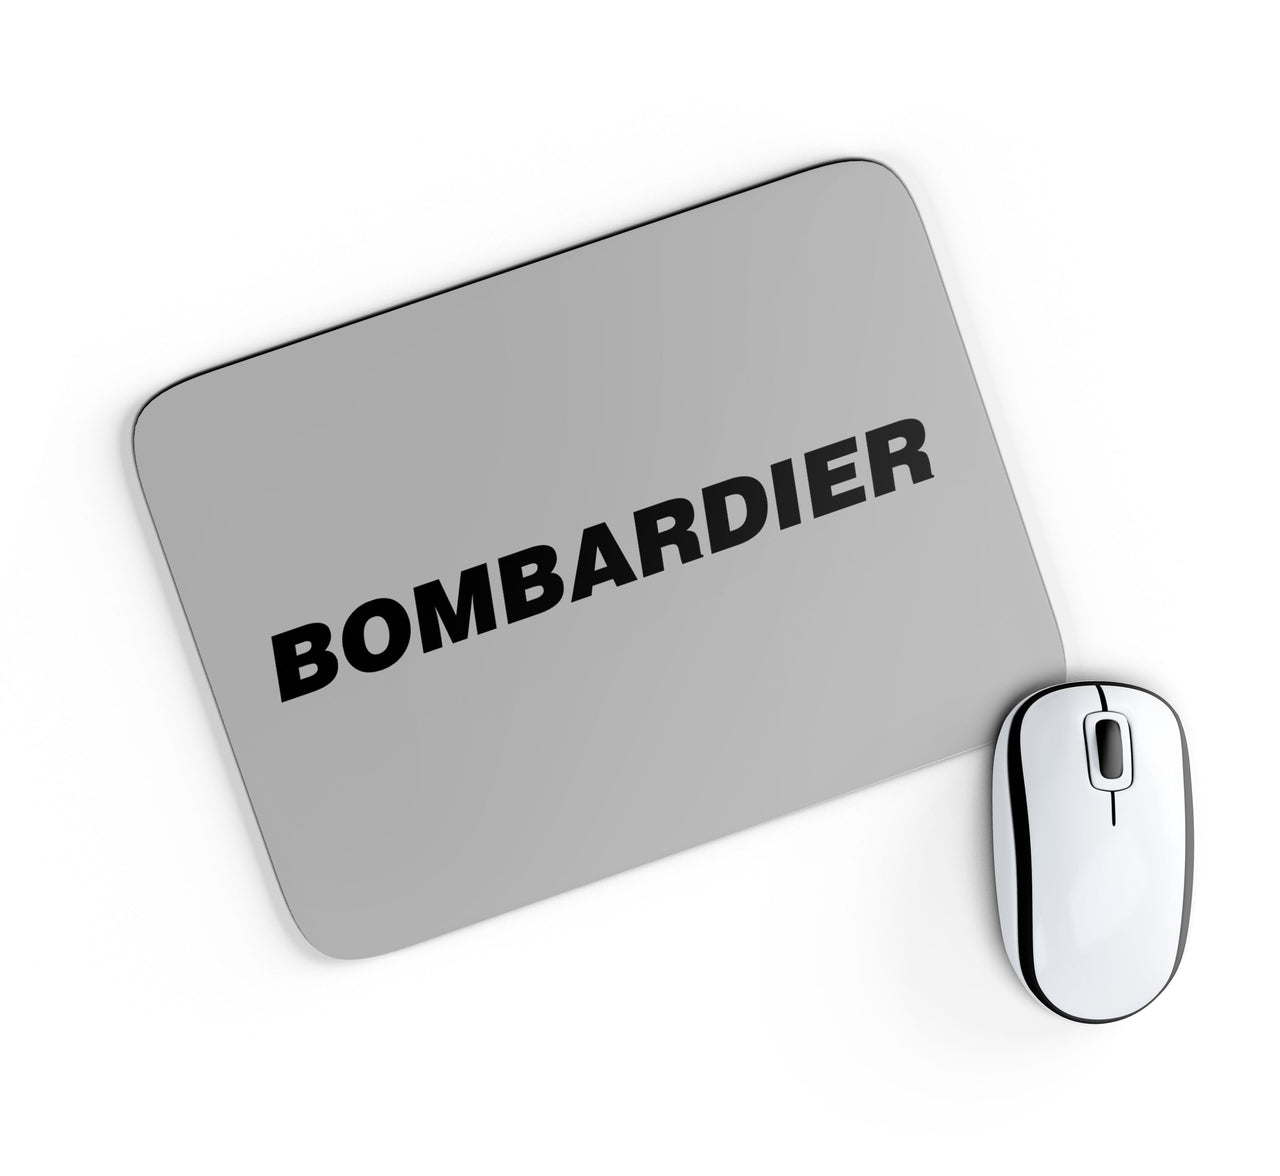 Bombardier & Text Designed Mouse Pads